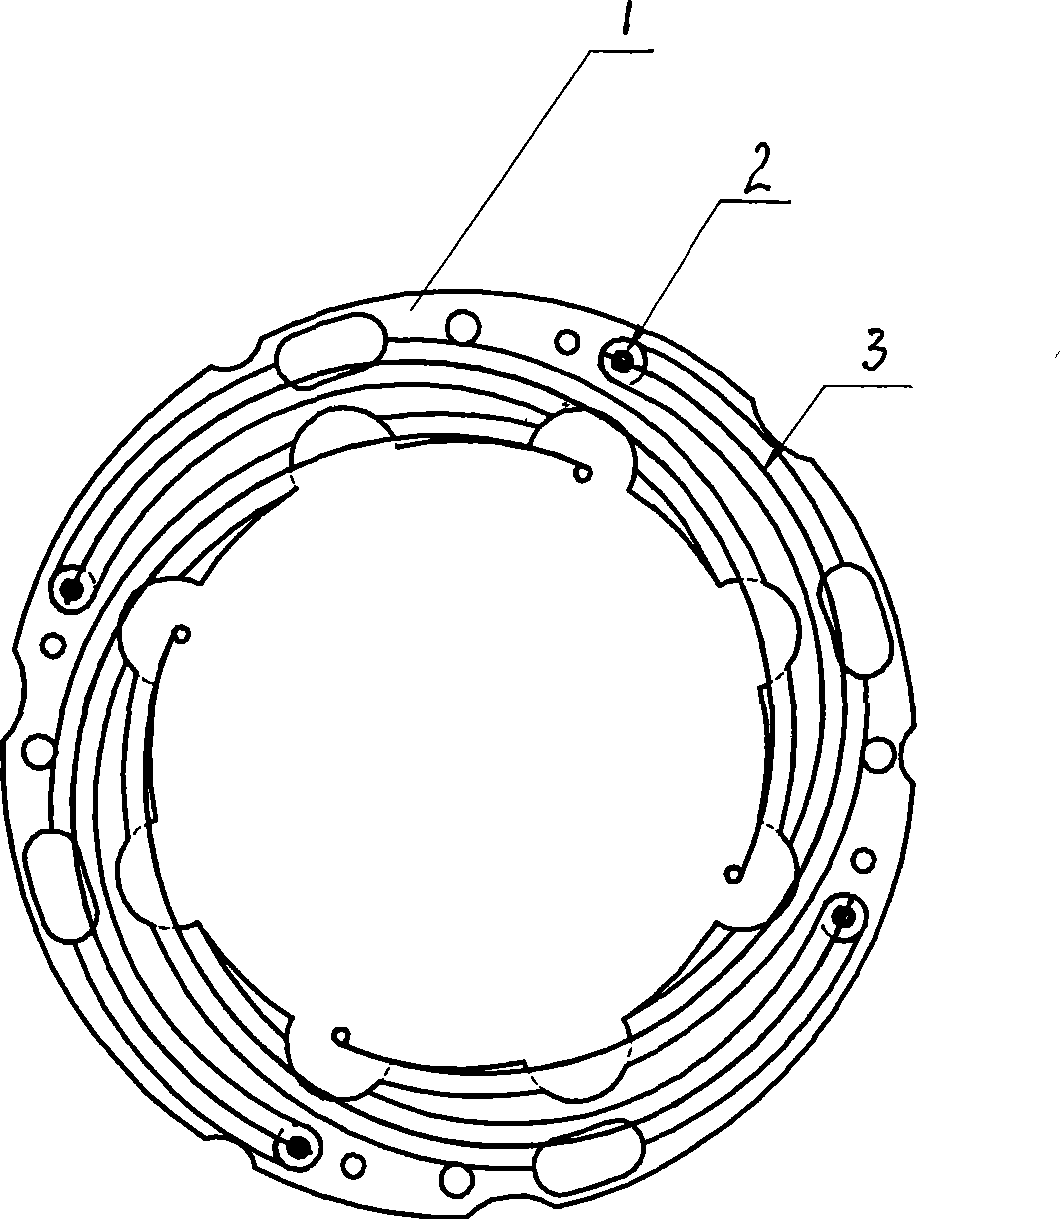 Automatic cleaning method of tin-zinc bronze conductive hair wire